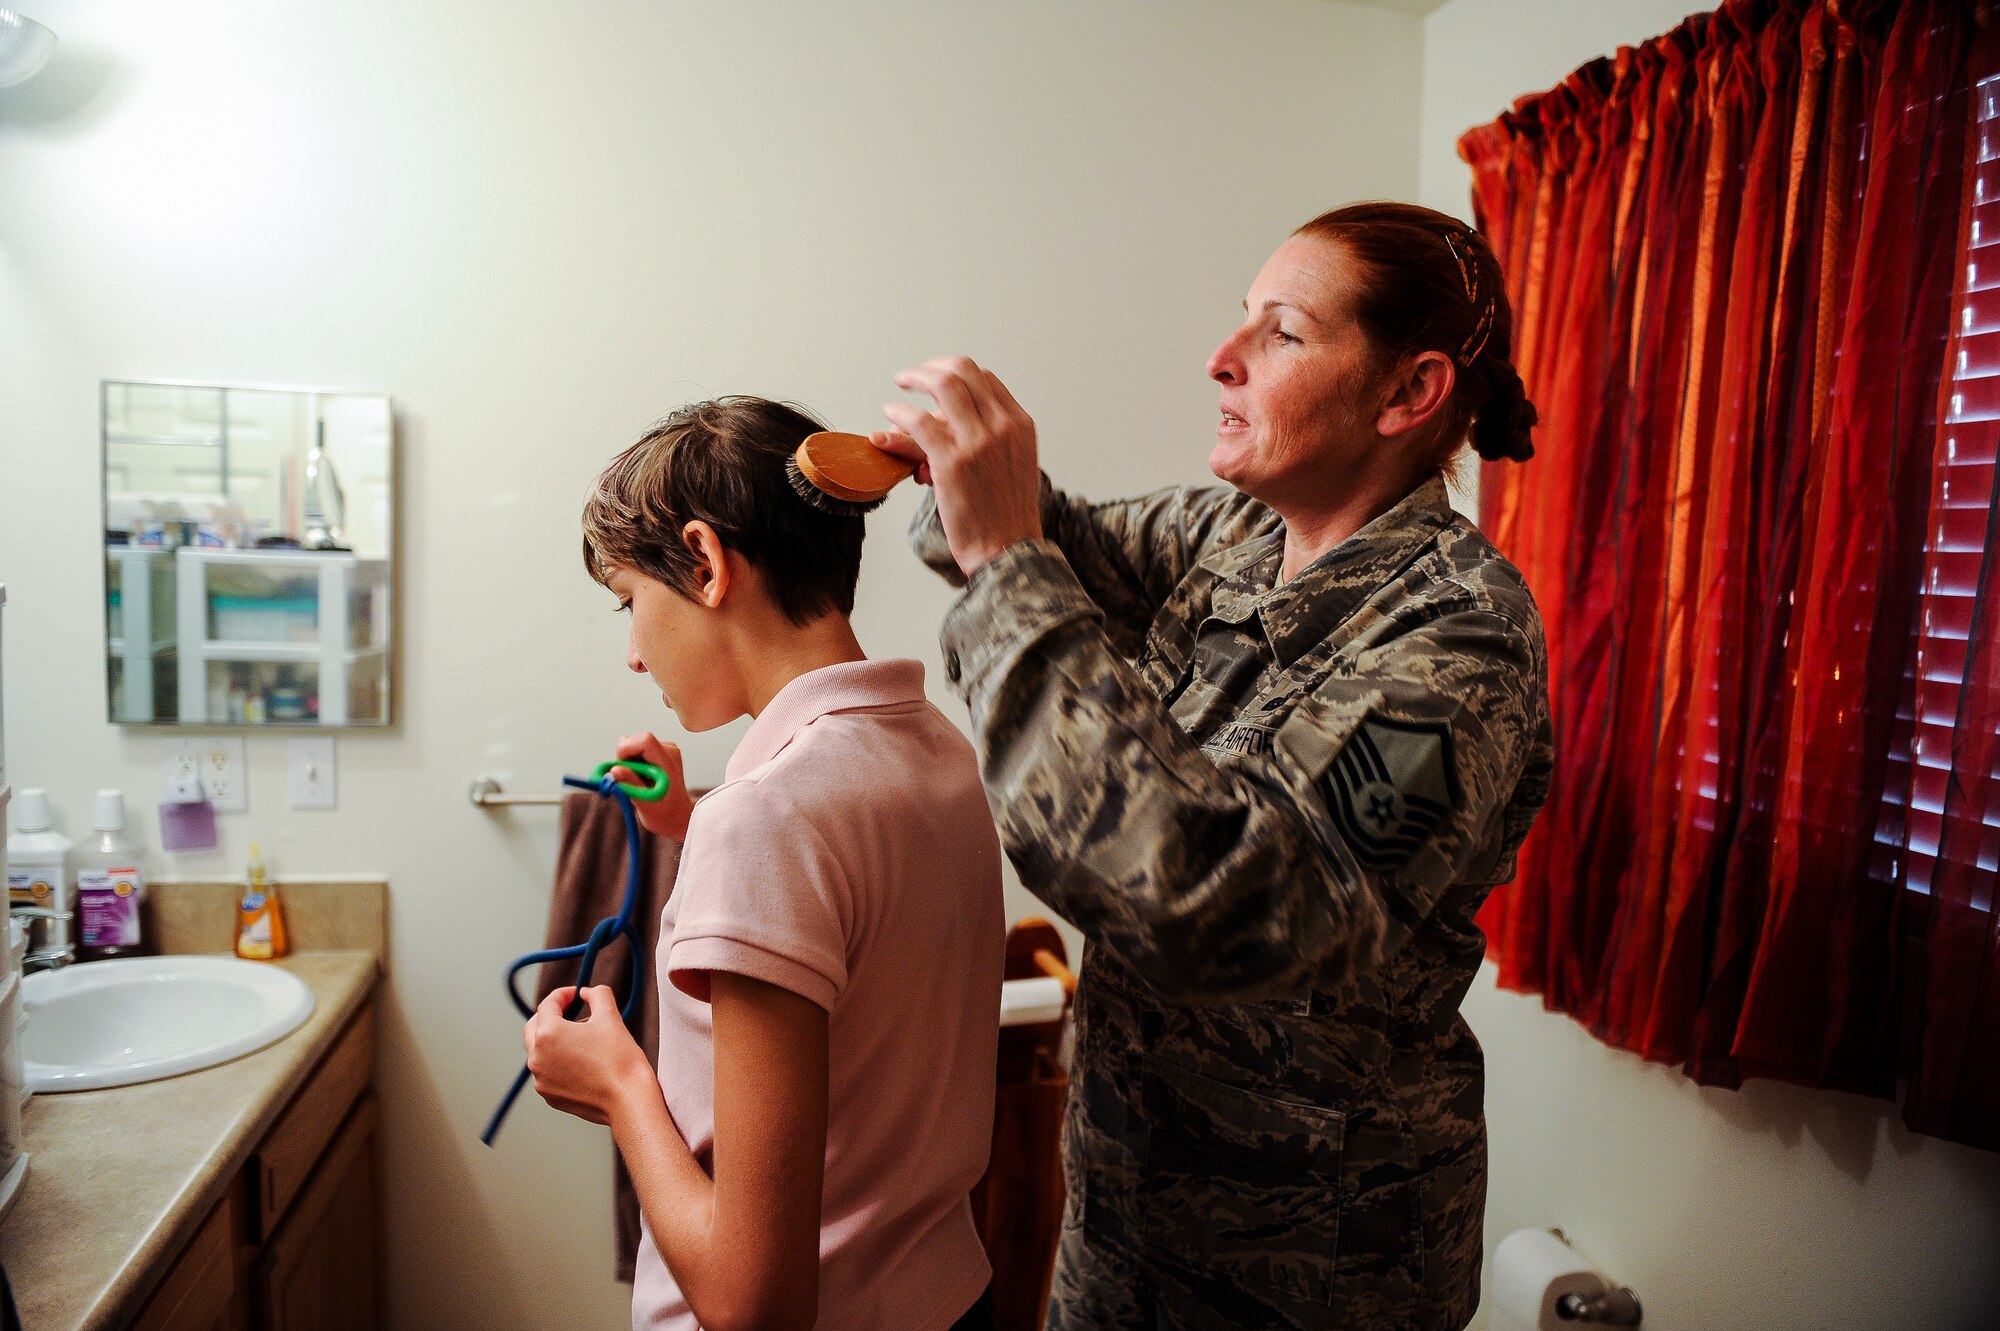 Master Sgt. Beth Jungk, a 19th Communications Squadron plans and programs manager, brushes her daughter, Morgan’s, hair Aug. 23, 2013, at their home in Jacksonville, Ark. Beth has to fully clothe and groom Morgan every day before school in addition to getting ready for work herself. (U.S. Air Force photo by Staff Sgt. Jake Barreiro)